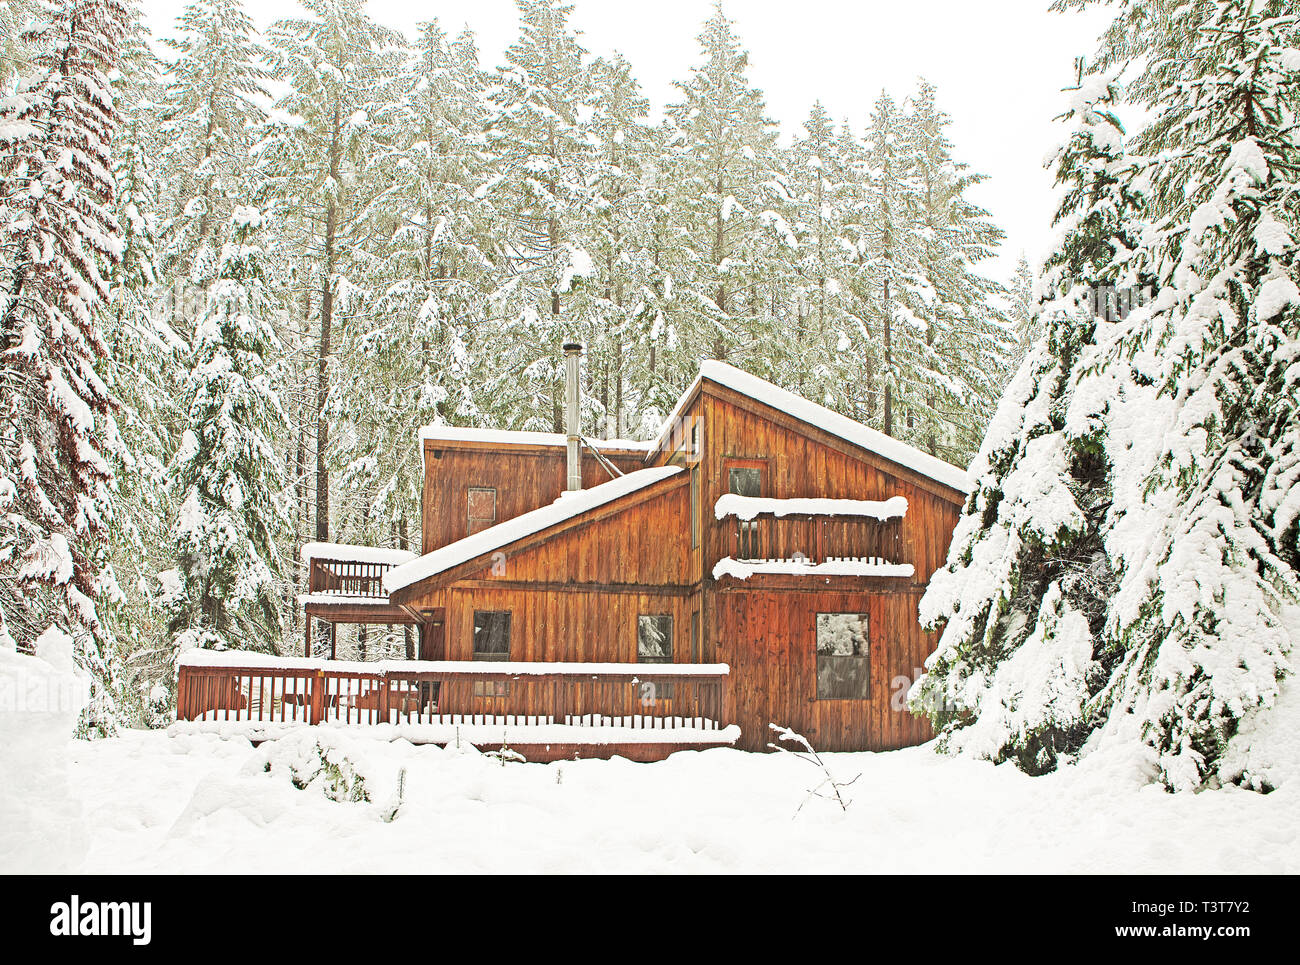 Modern wood cabin in snowy forest Stock Photo